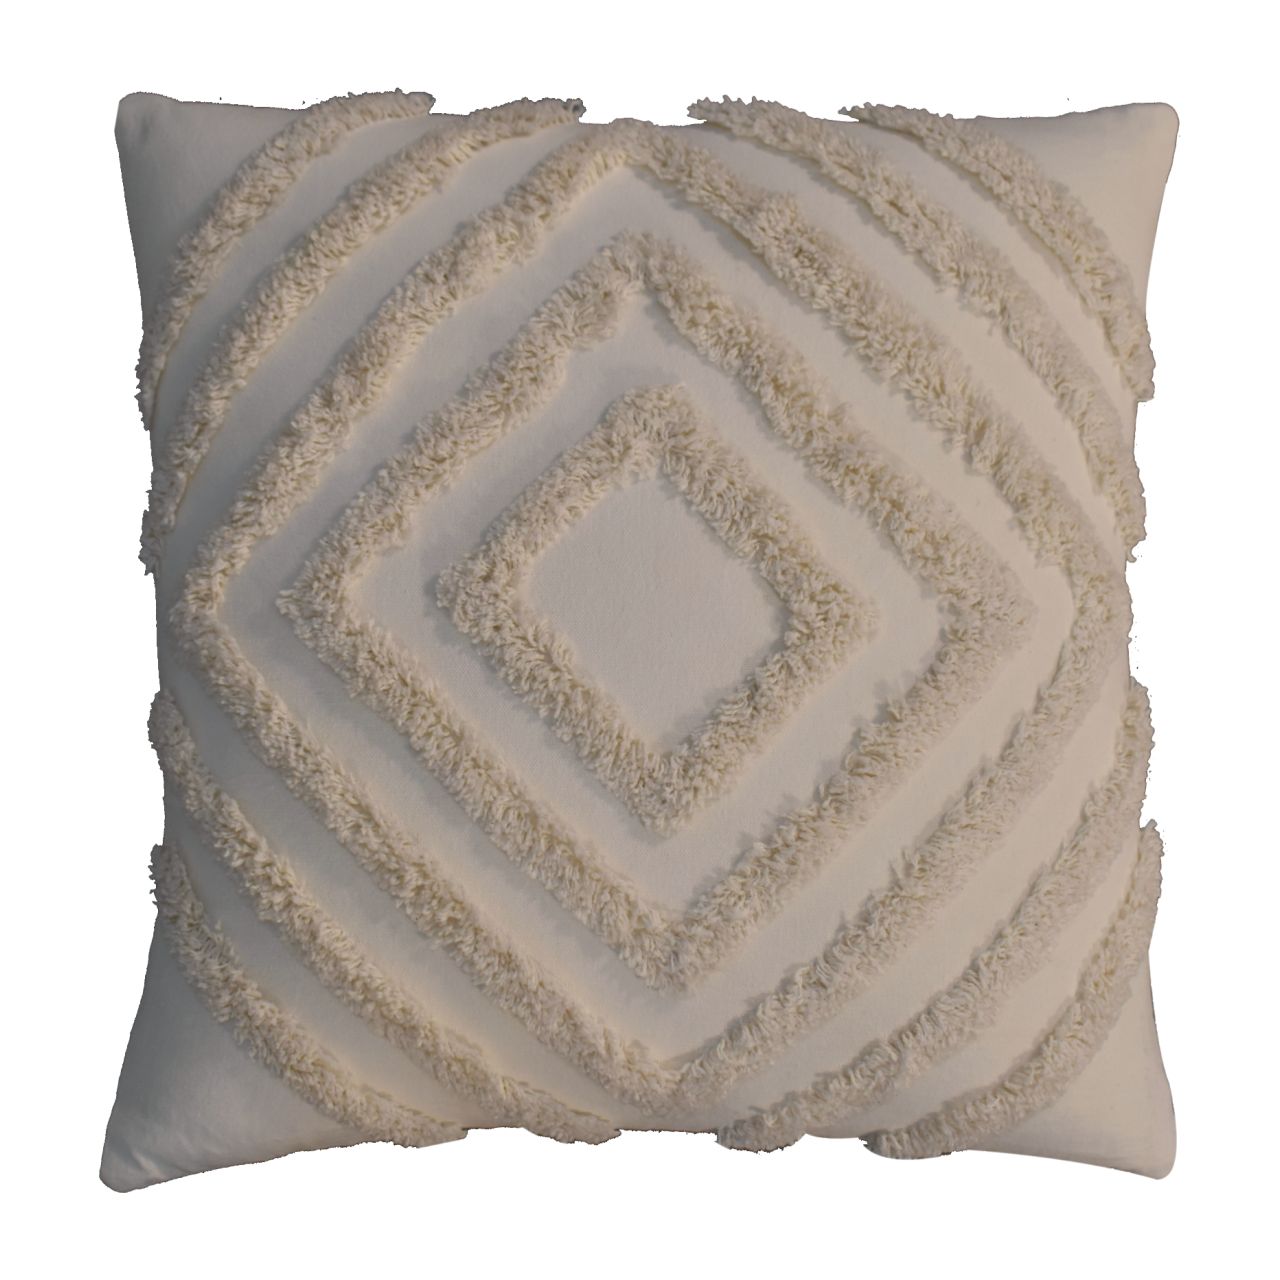 View Tacy Cream Cushion Set of 2 information